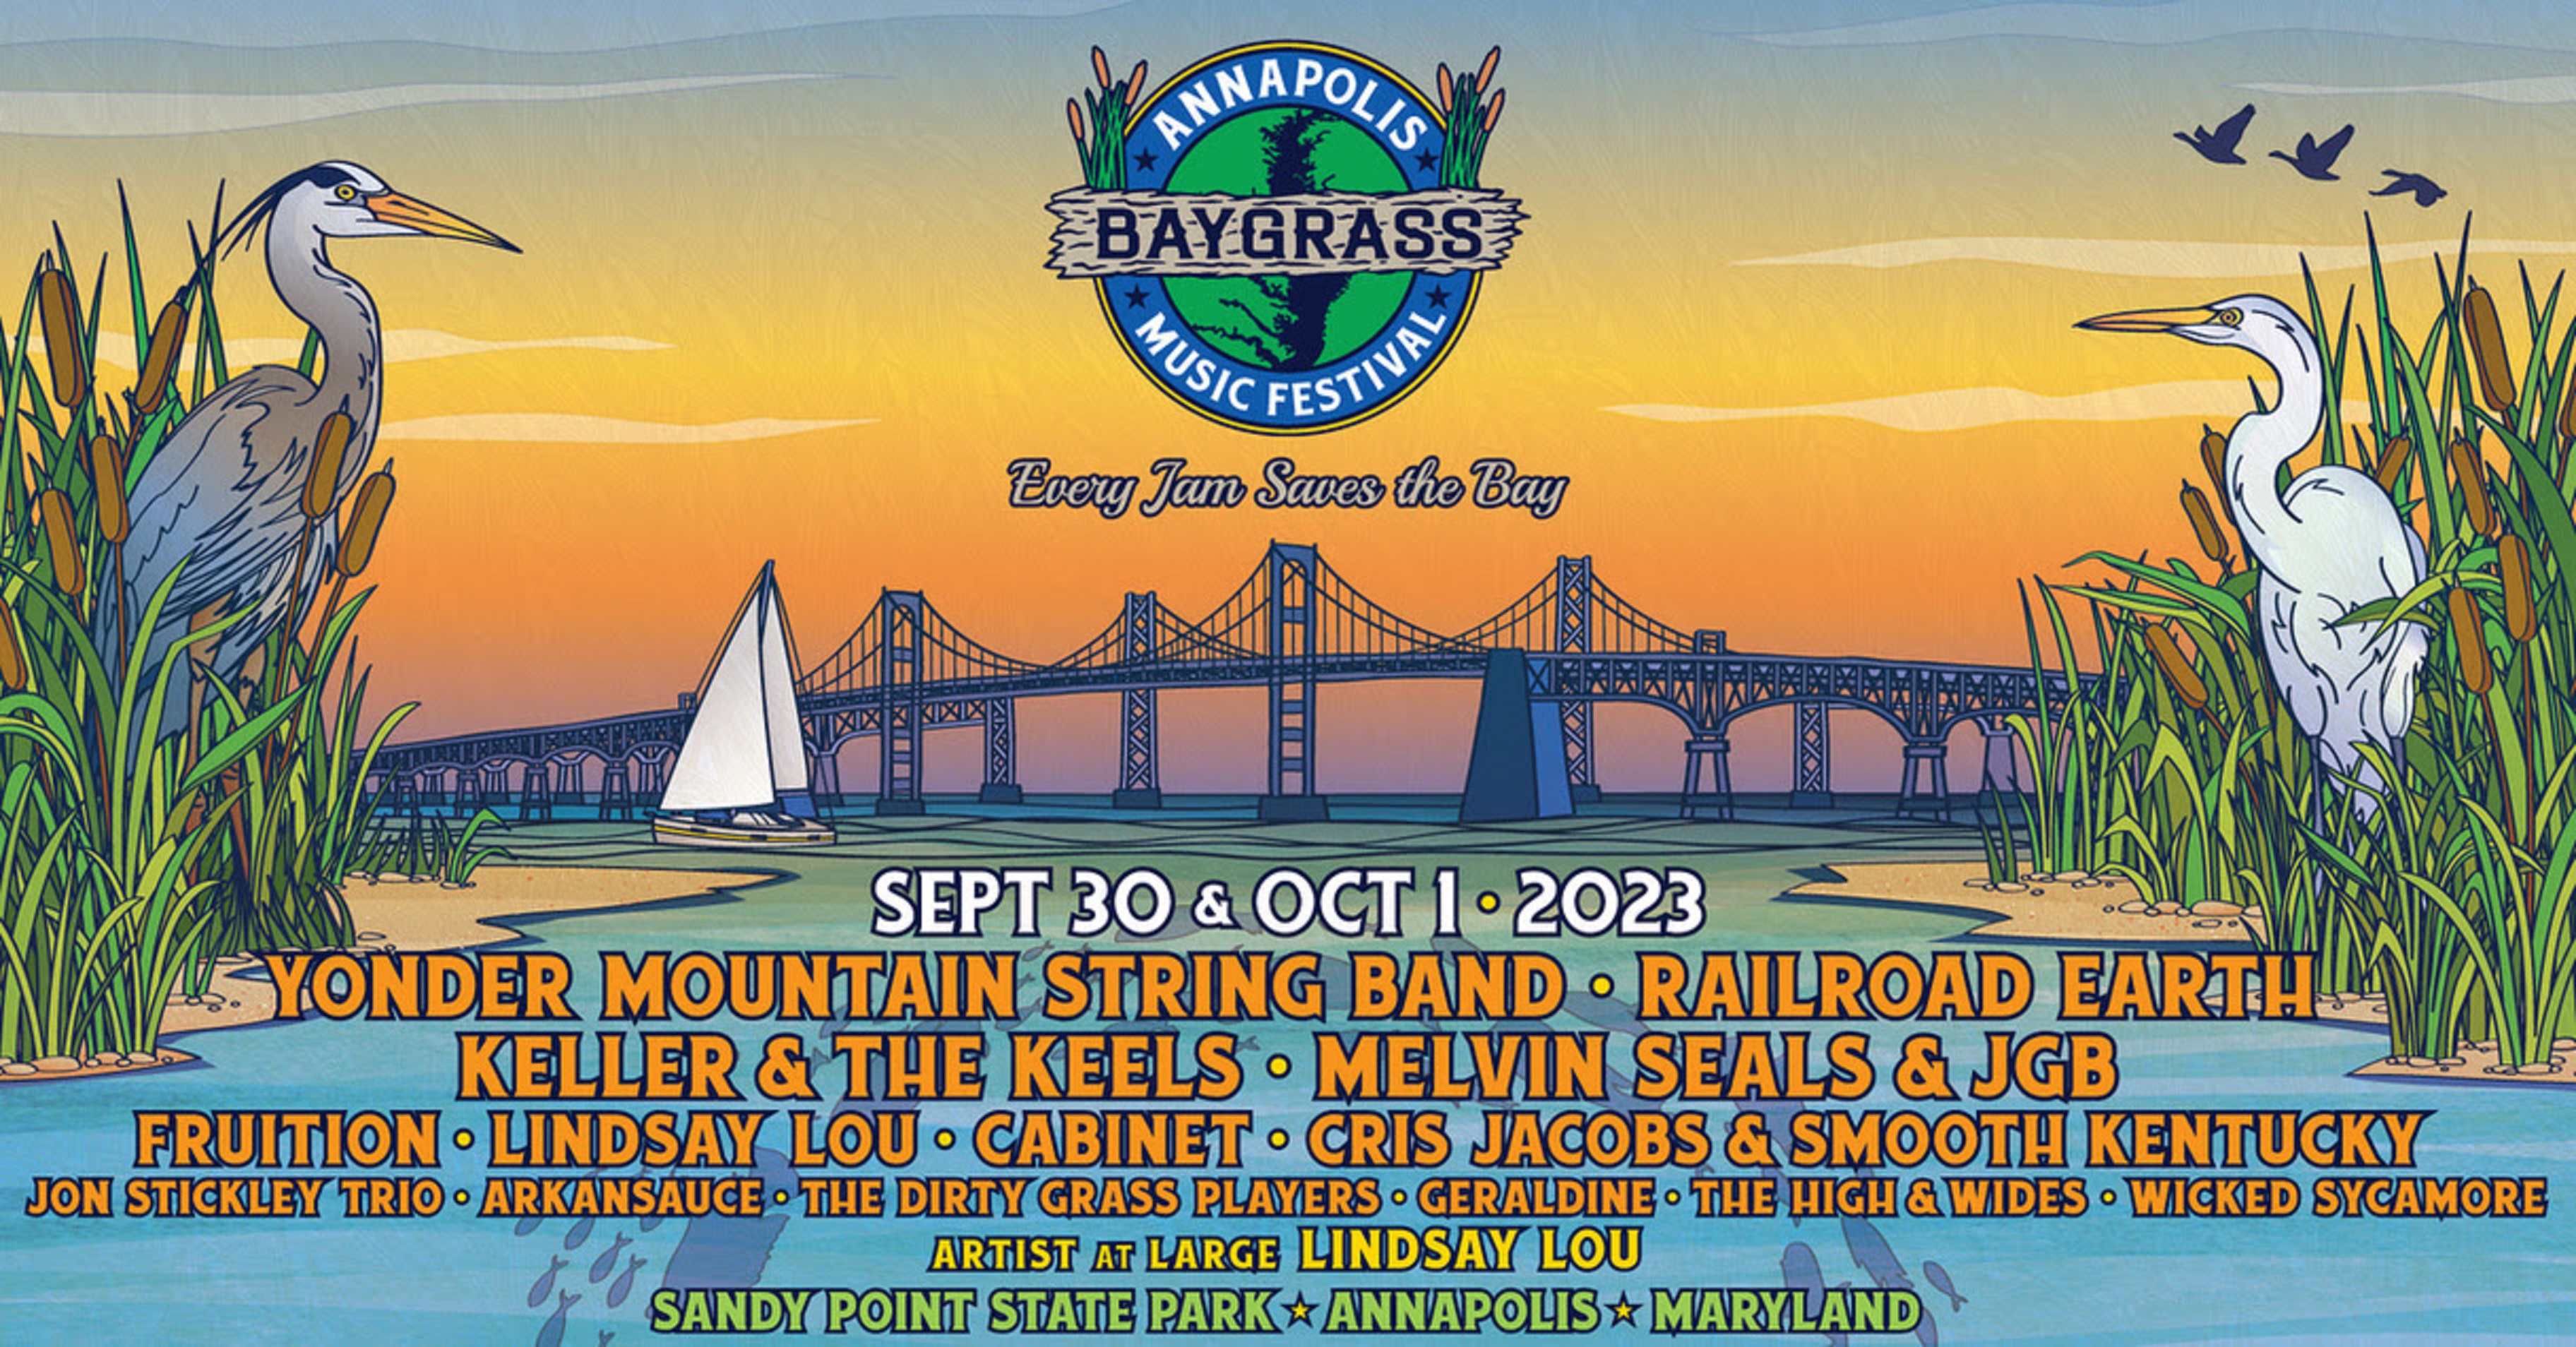 Annapolis Baygrass Includes Yonder Mountain, Railroad Earth, Keller & The Keels